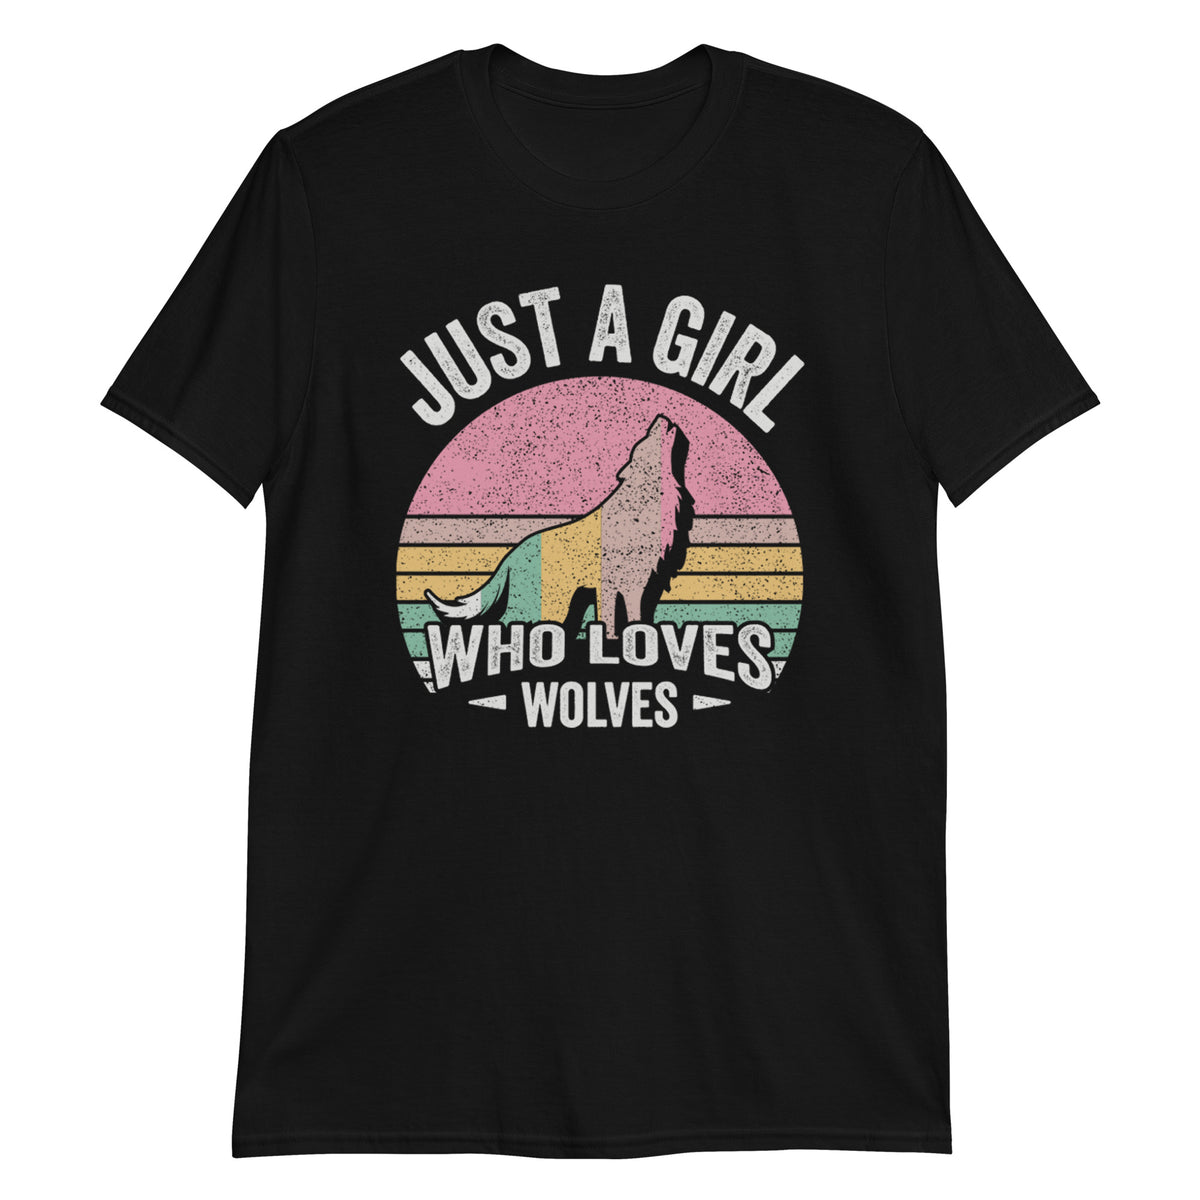 Just A Girl Who Loves Wolves Funny Vintage Retro Unisex T-Shirt